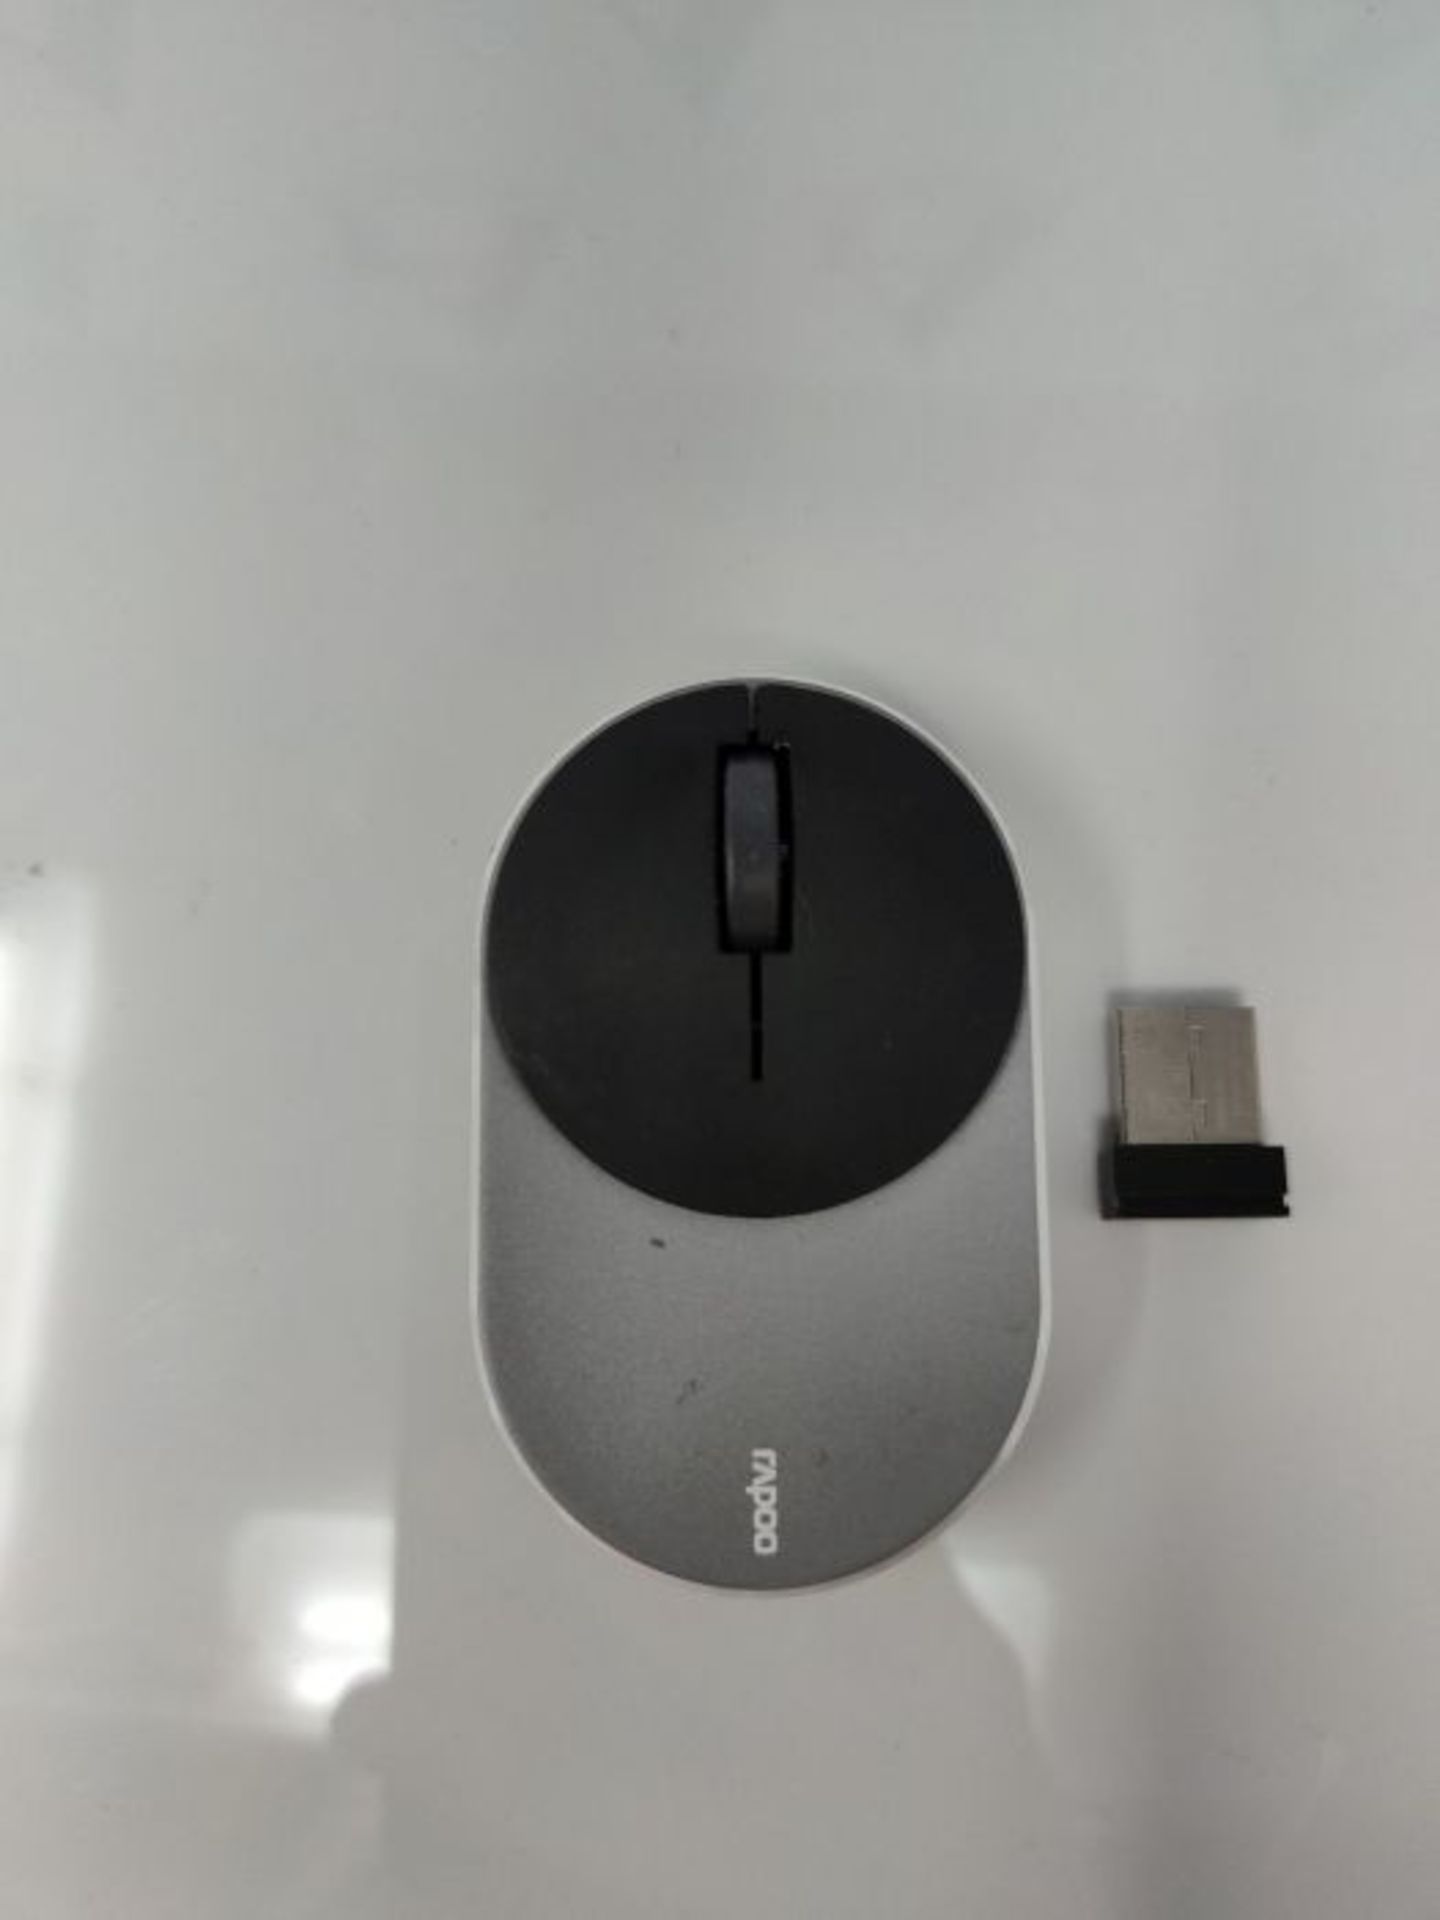 Rapoo M600 Mini Silent Wireless Mouse, Bluetooth and Wireless (2.4 GHz) via USB, Multi - Image 2 of 2